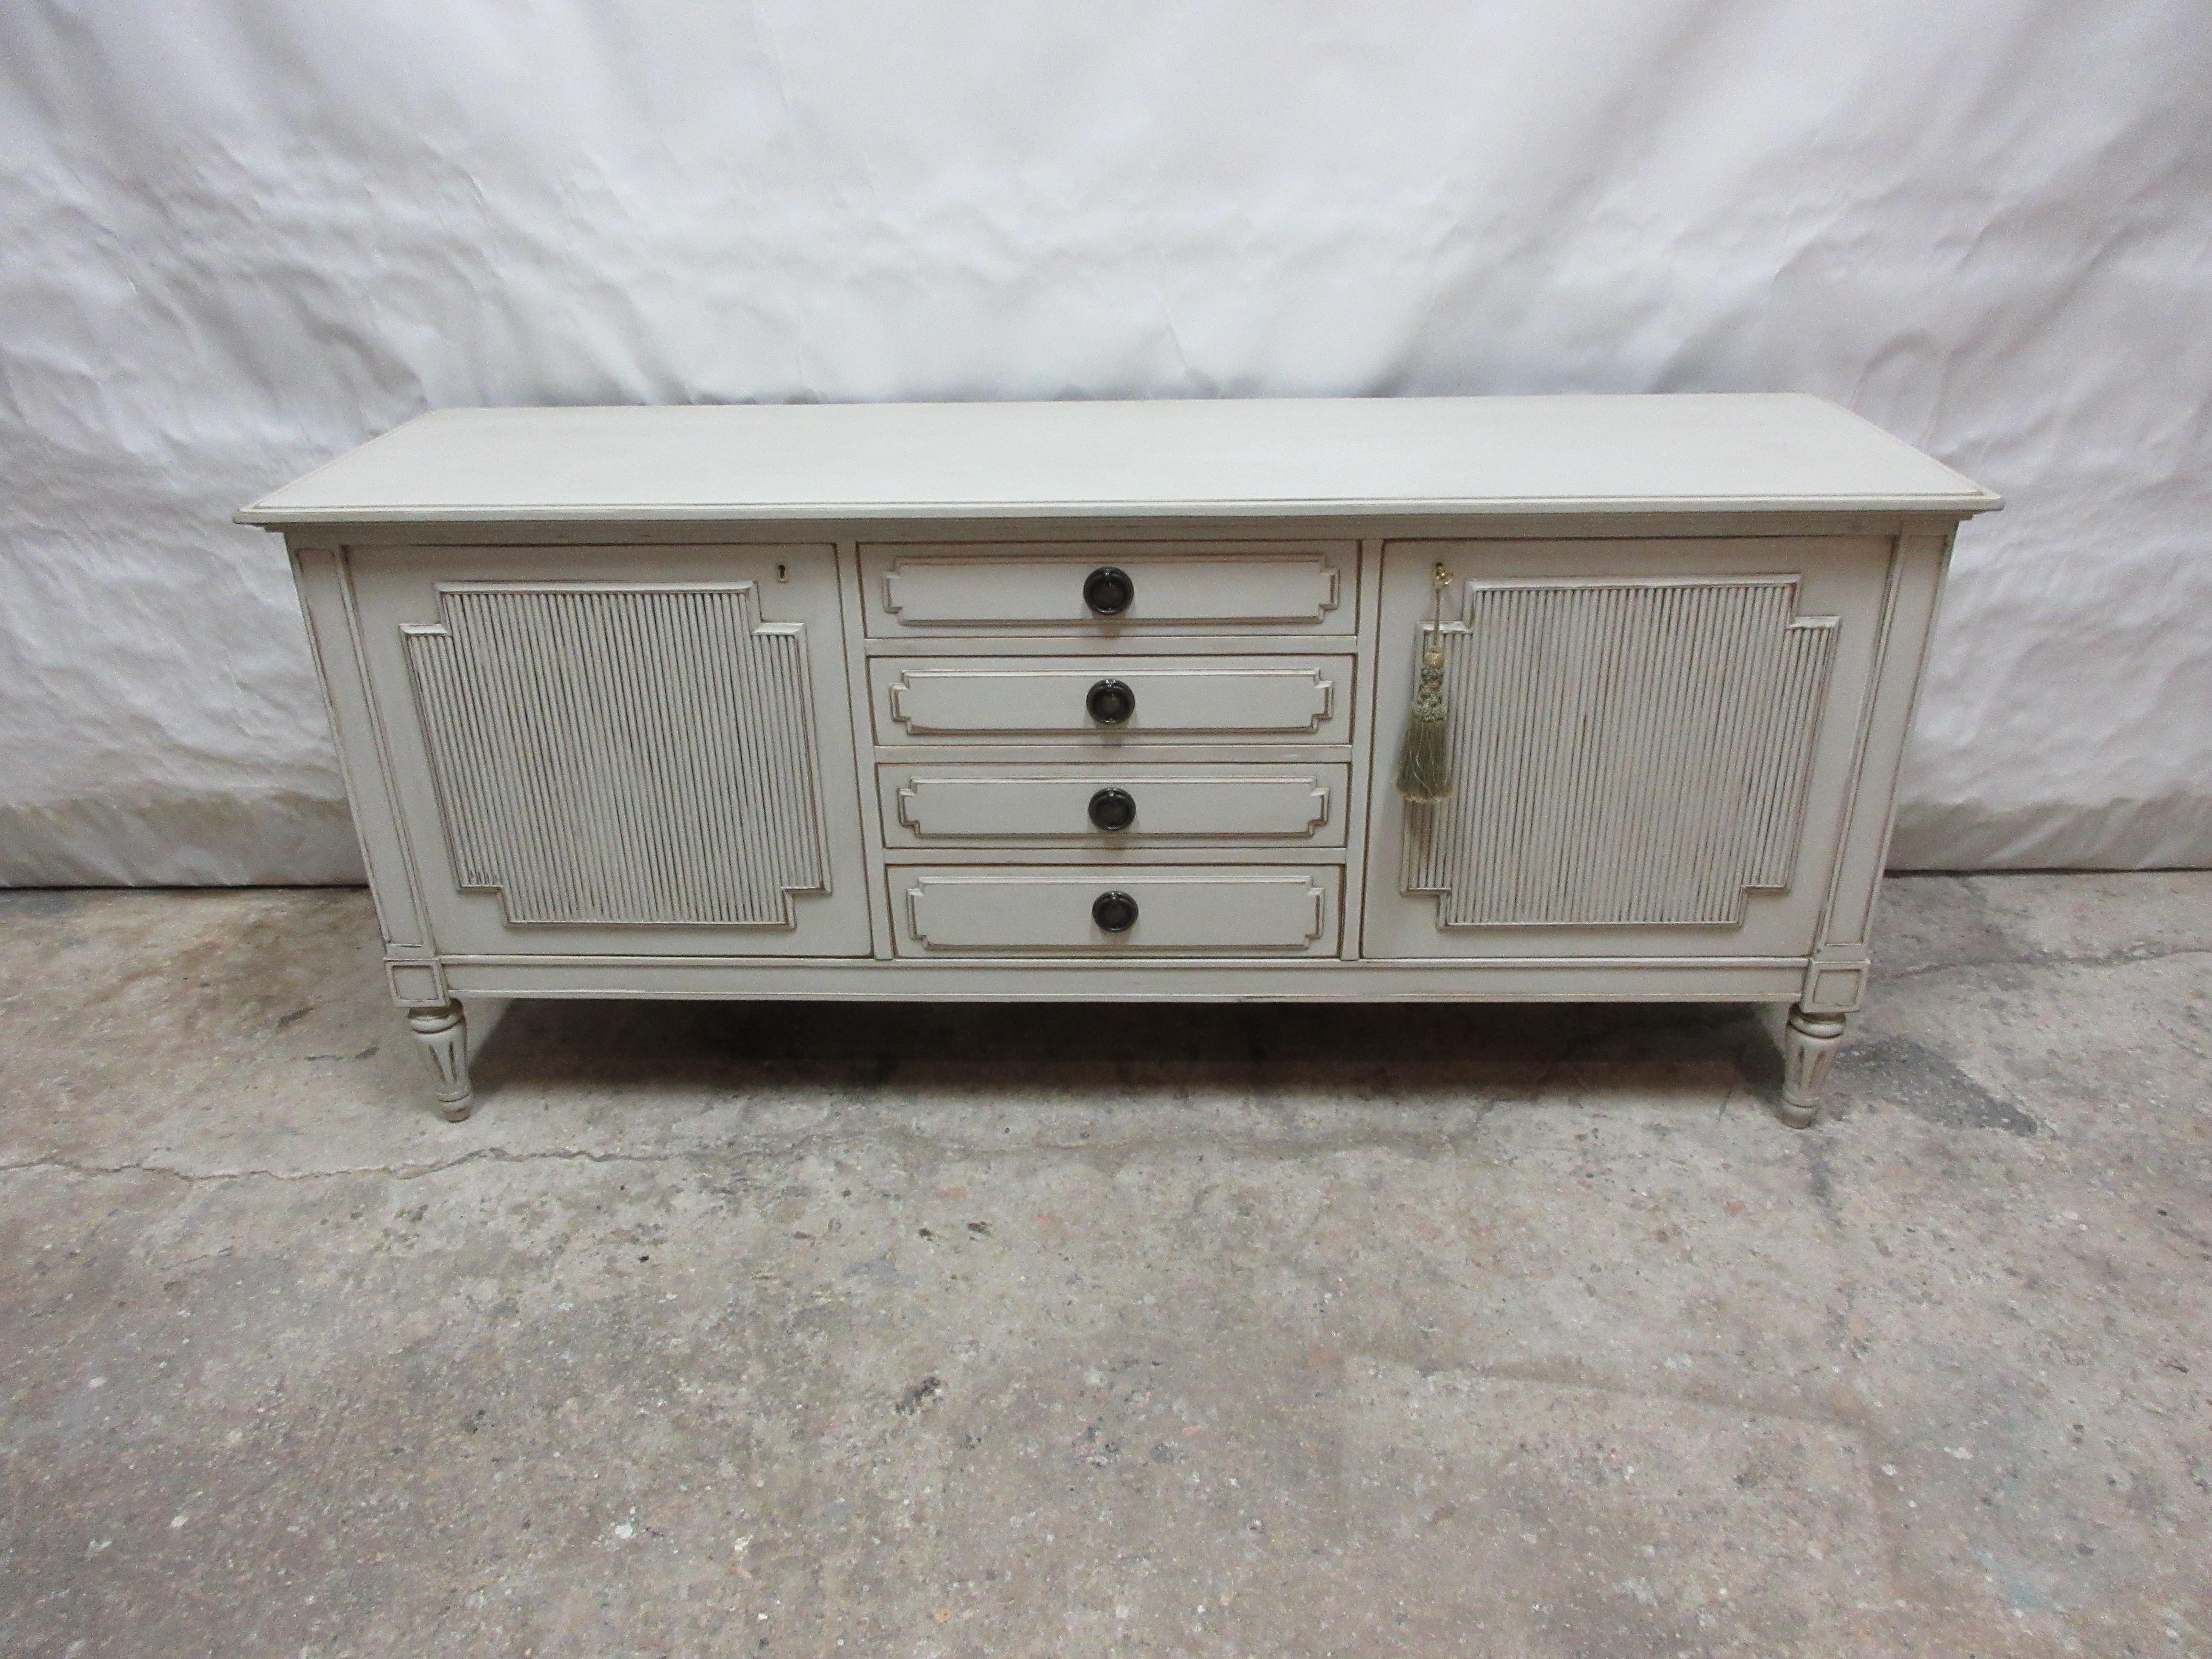 This is a Unique Swedish Gustavian Style Sideboard. Its been restored and repainted with Milk Paint 